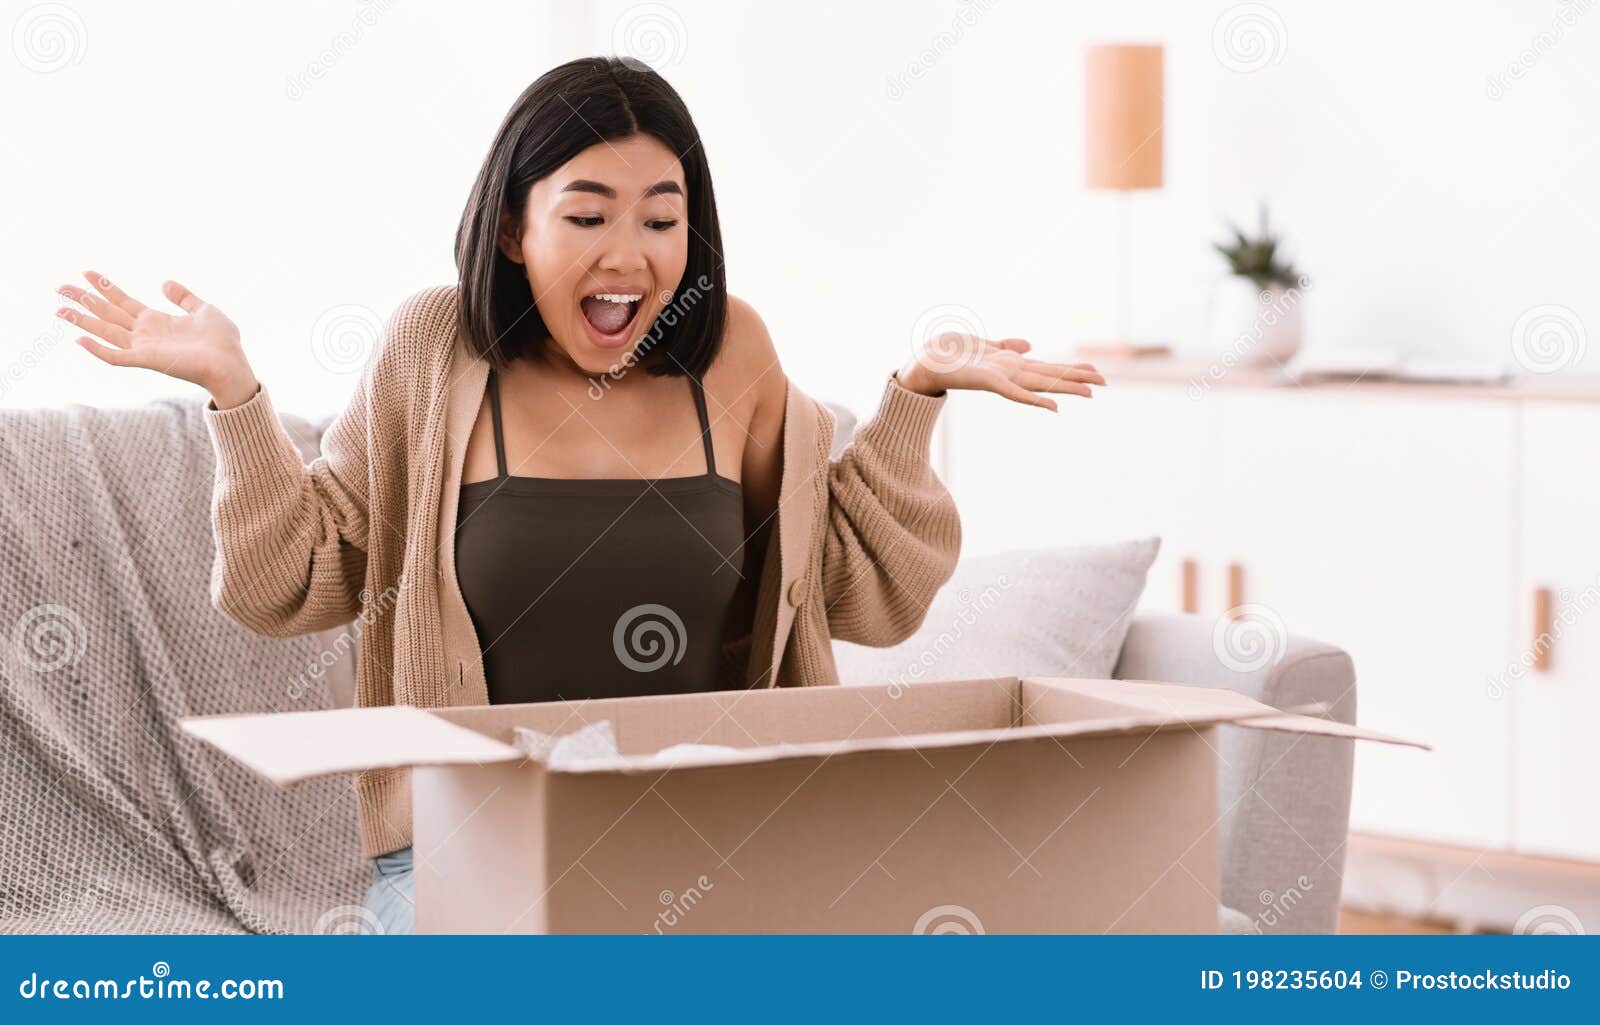 excited asian woman unpacking parcel after online shopping